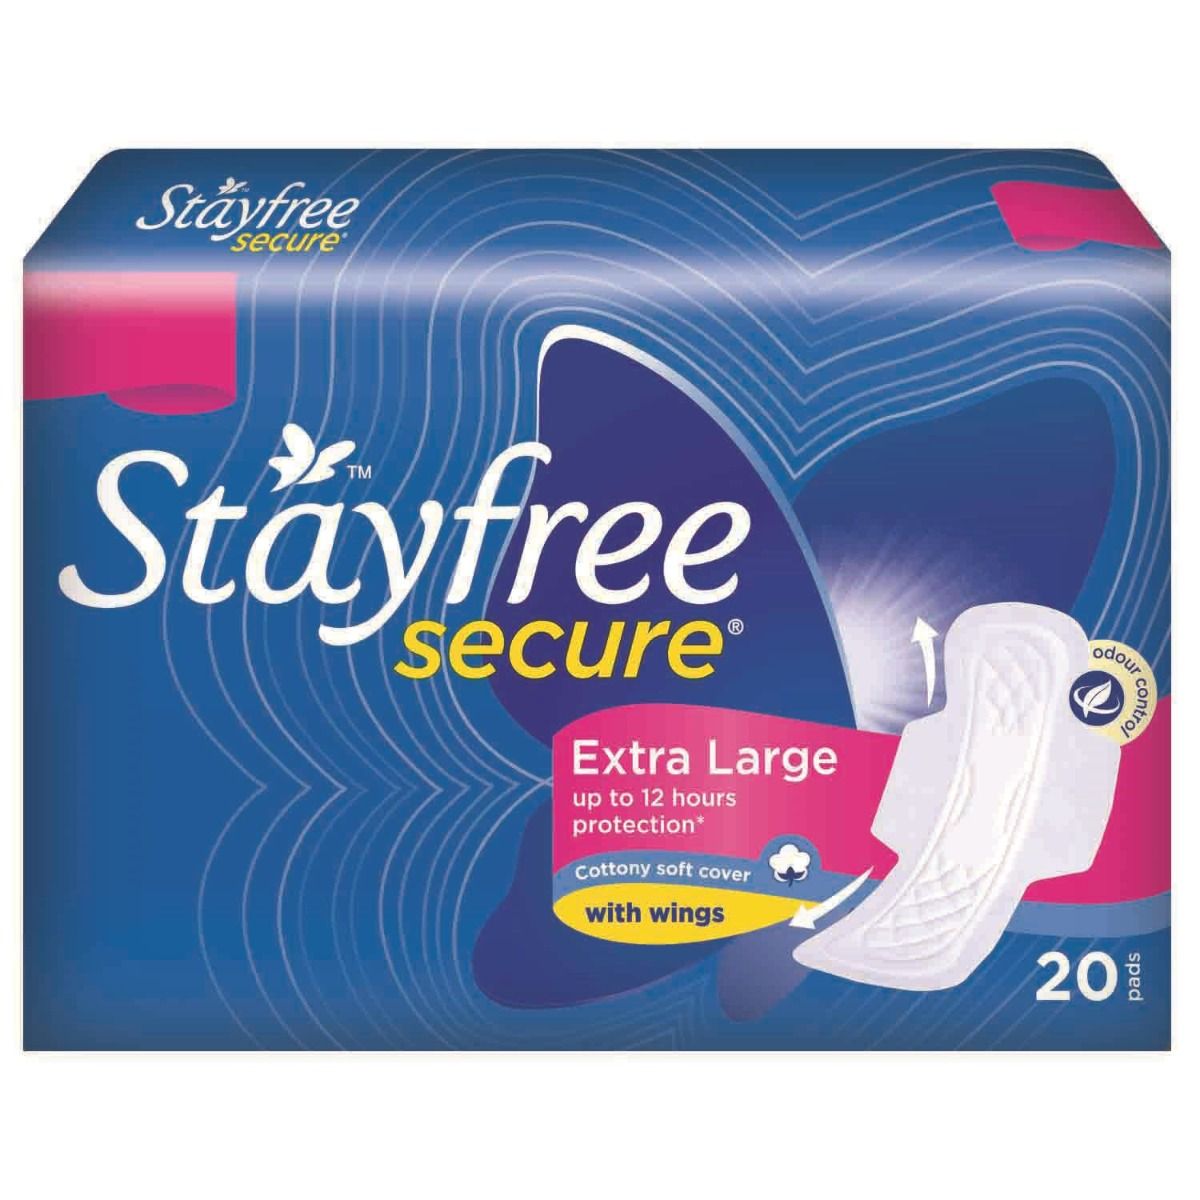 Buy Stayfree Secure Pads with Wings XL, 20 Count Online